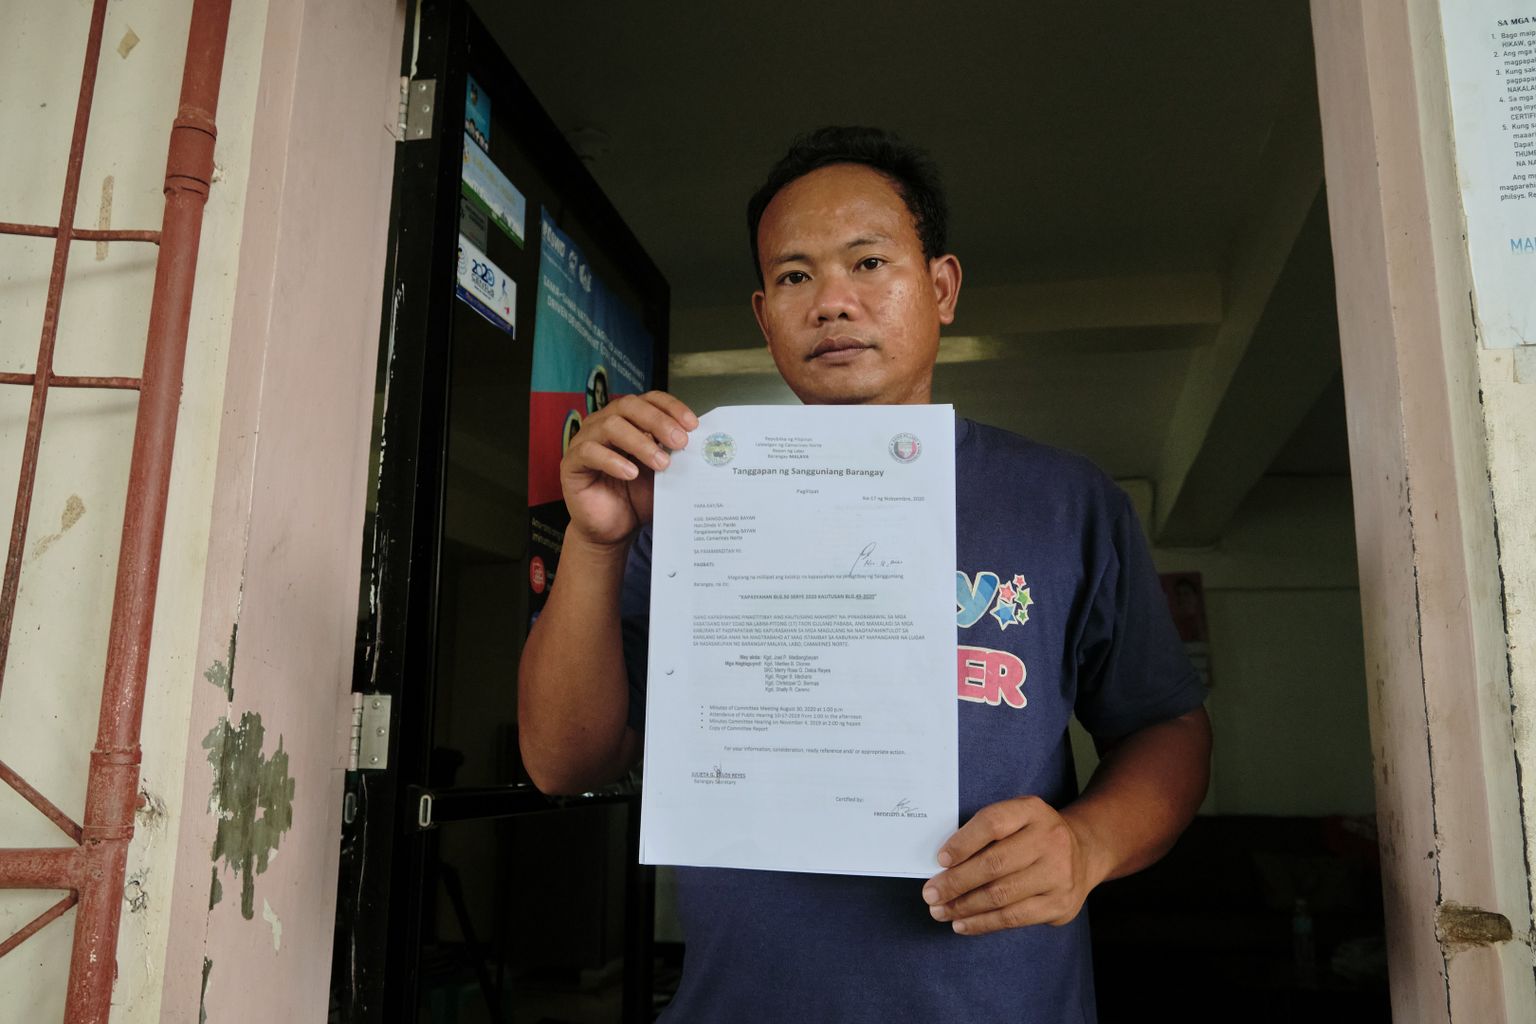 Barangay Councilor Joel Madlangbayan exhibits a copy of the child labor ordinance he authored. The local legislation entitled “Ordinance No. 50 Series 2020” seeks to prohibit youth aged 17 years old and below from engaging in work in extremely dangerous jobs including mining.